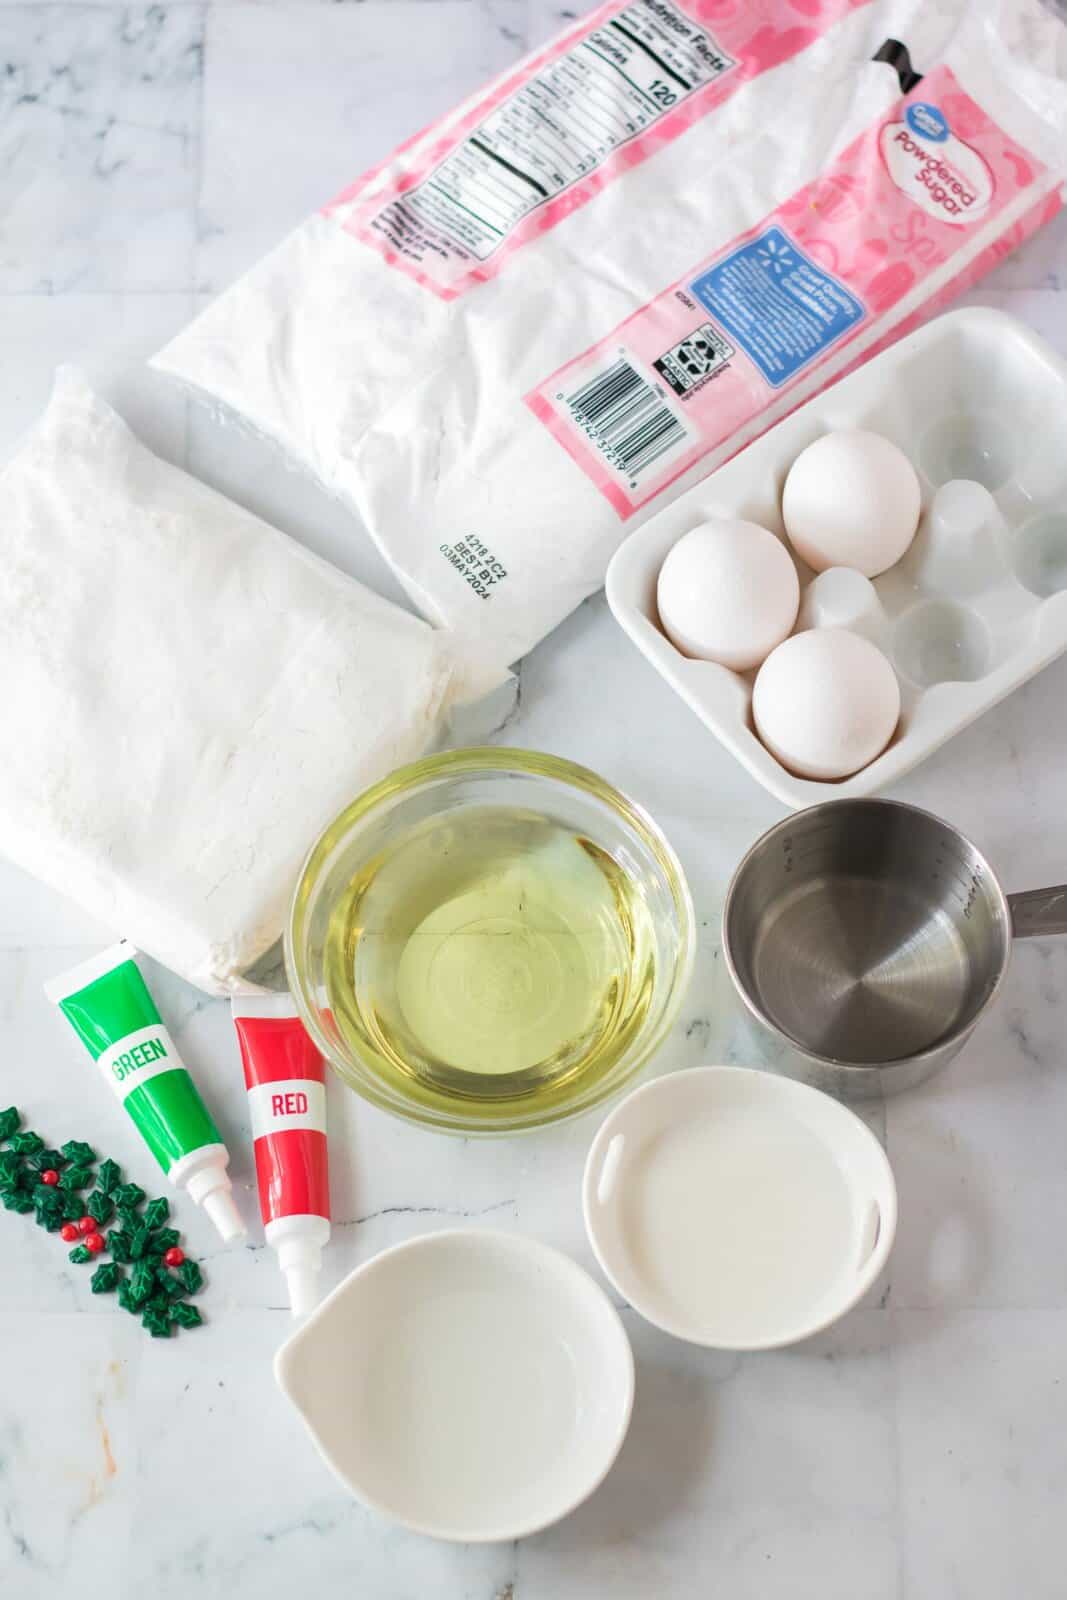 white cake mix, eggs, powdered sugar, oil, almond extract, read and green food coloring. 